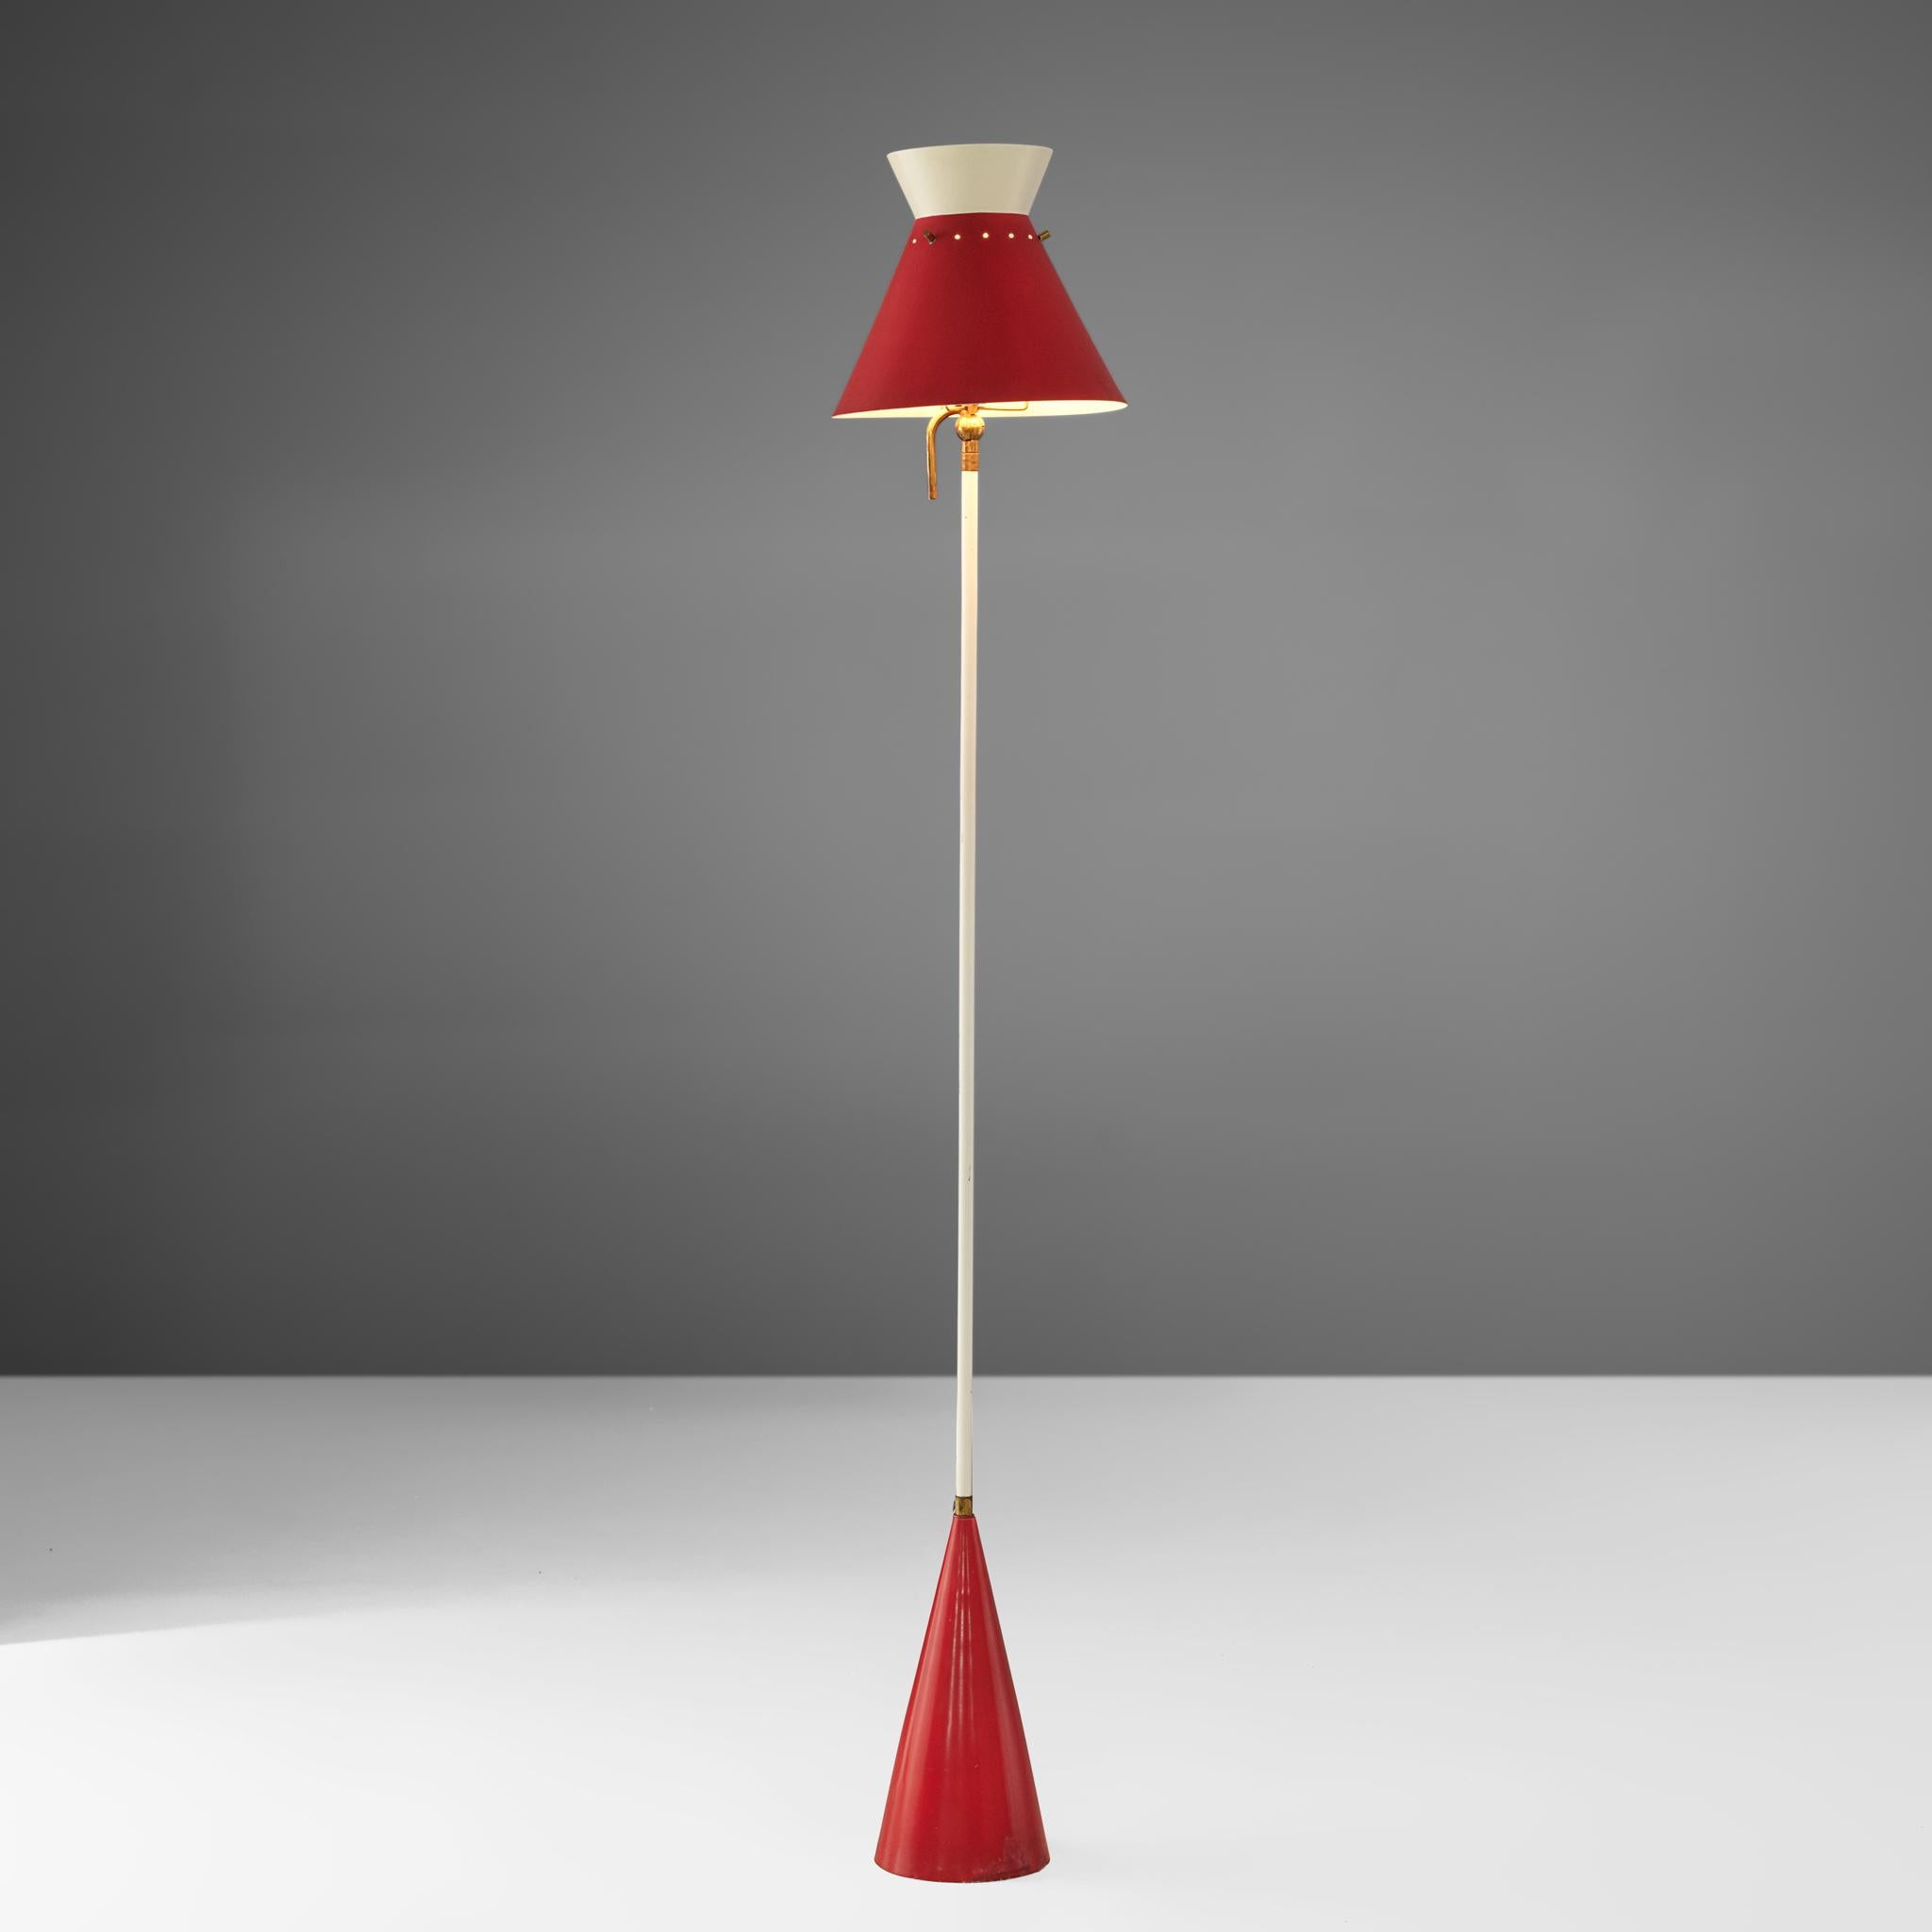 Gilardi & Barzaghi, floor lamp, varnished tubular steel, brass and lacquered aluminium, Italy, 1958.

This floor lamp features a aluminium foot and a shade with a white smaller mirrored head. The bright red color of the lampshade is mirrored in the